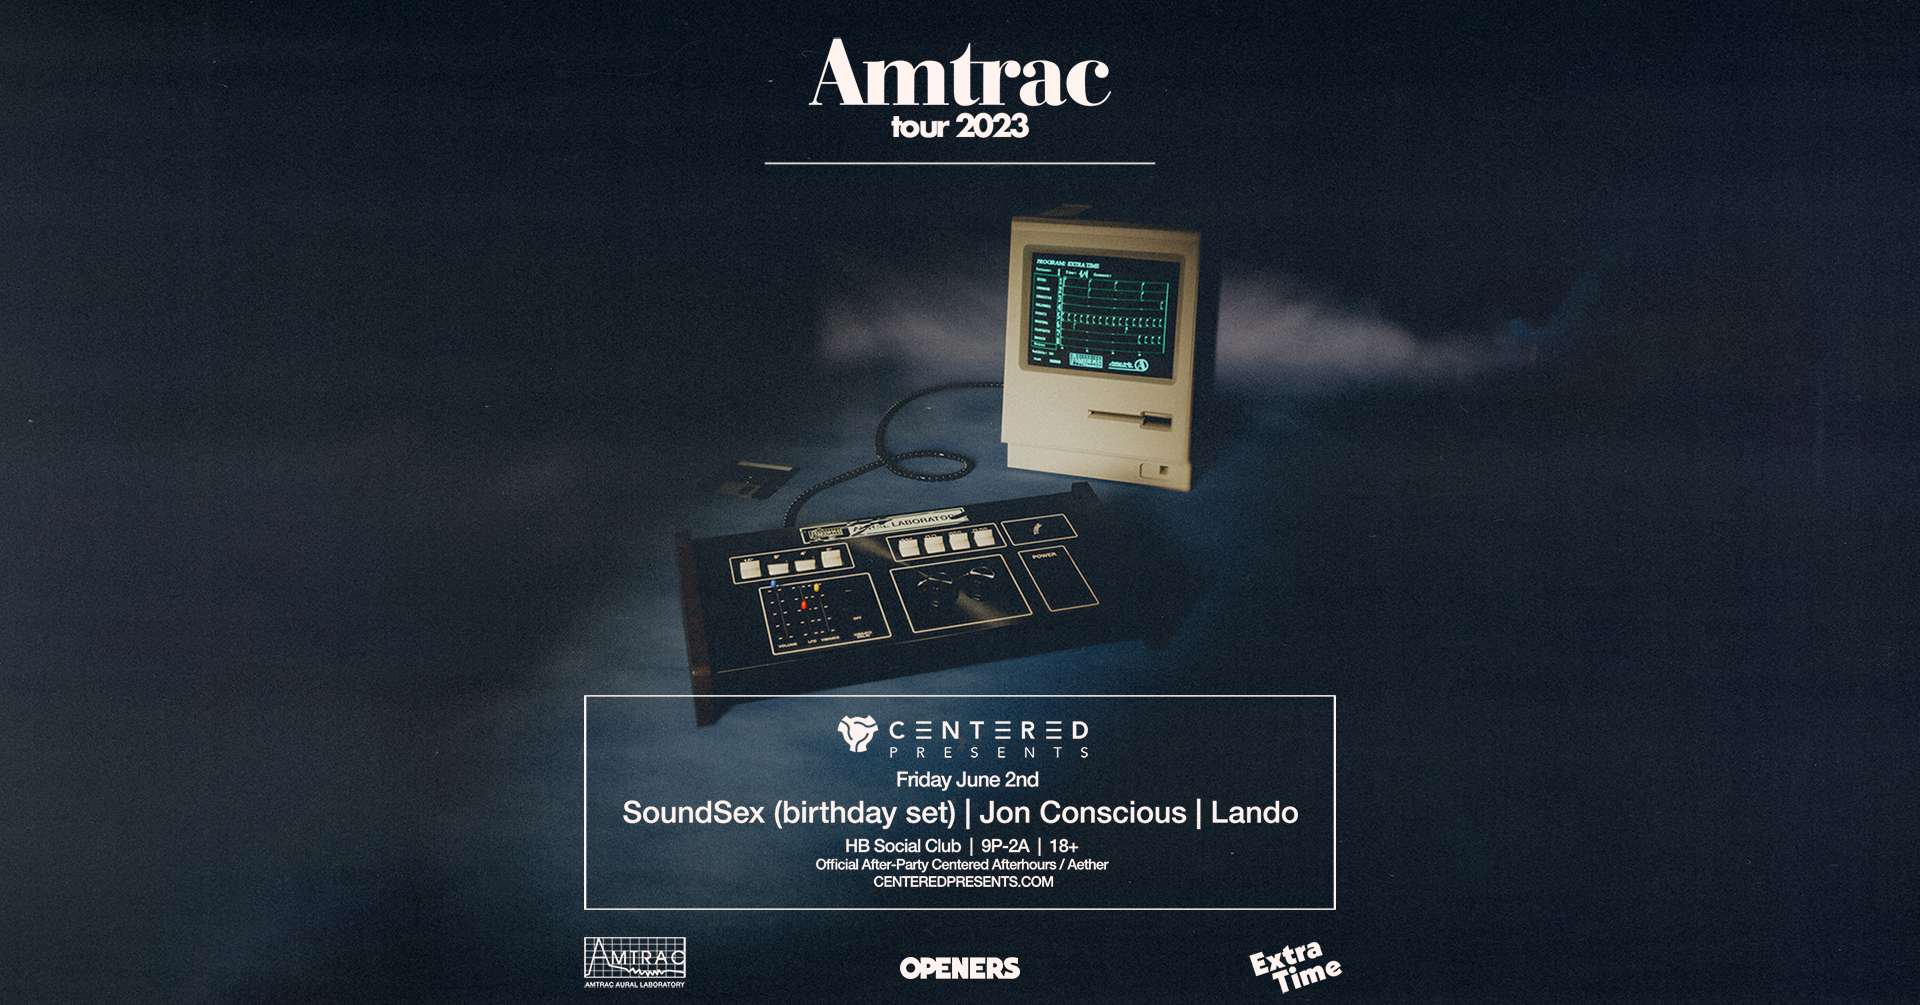 Centered presents, Amtrac [EXTRA TIME TOUR 2023] - フライヤー表